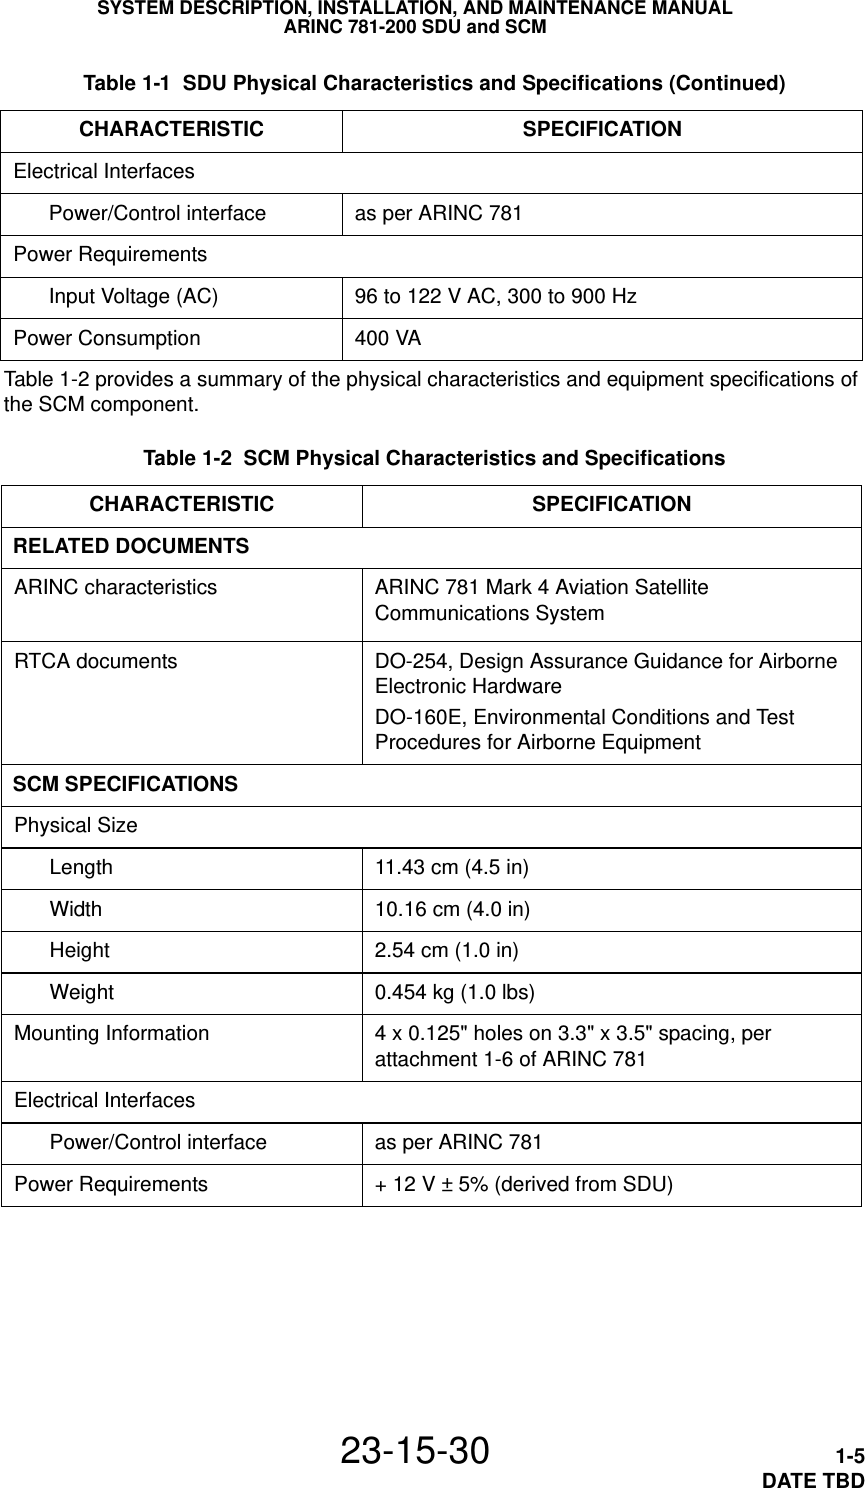 SYSTEM DESCRIPTION, INSTALLATION, AND MAINTENANCE MANUALARINC 781-200 SDU and SCM23-15-30 1-5DATE TBDTable 1-2 provides a summary of the physical characteristics and equipment specifications of the SCM component. Table 1-2  SCM Physical Characteristics and Specifications CHARACTERISTIC SPECIFICATIONRELATED DOCUMENTSARINC characteristics ARINC 781 Mark 4 Aviation Satellite Communications SystemRTCA documents DO-254, Design Assurance Guidance for Airborne Electronic HardwareDO-160E, Environmental Conditions and Test Procedures for Airborne EquipmentSCM SPECIFICATIONSPhysical SizeLength 11.43 cm (4.5 in)Width 10.16 cm (4.0 in)Height 2.54 cm (1.0 in)Weight 0.454 kg (1.0 lbs)Mounting Information 4 x 0.125&quot; holes on 3.3&quot; x 3.5&quot; spacing, per attachment 1-6 of ARINC 781Electrical InterfacesPower/Control interface as per ARINC 781Power Requirements + 12 V ± 5% (derived from SDU)Electrical InterfacesPower/Control interface as per ARINC 781Power RequirementsInput Voltage (AC) 96 to 122 V AC, 300 to 900 HzPower Consumption 400 VA  Table 1-1  SDU Physical Characteristics and Specifications (Continued)CHARACTERISTIC SPECIFICATION